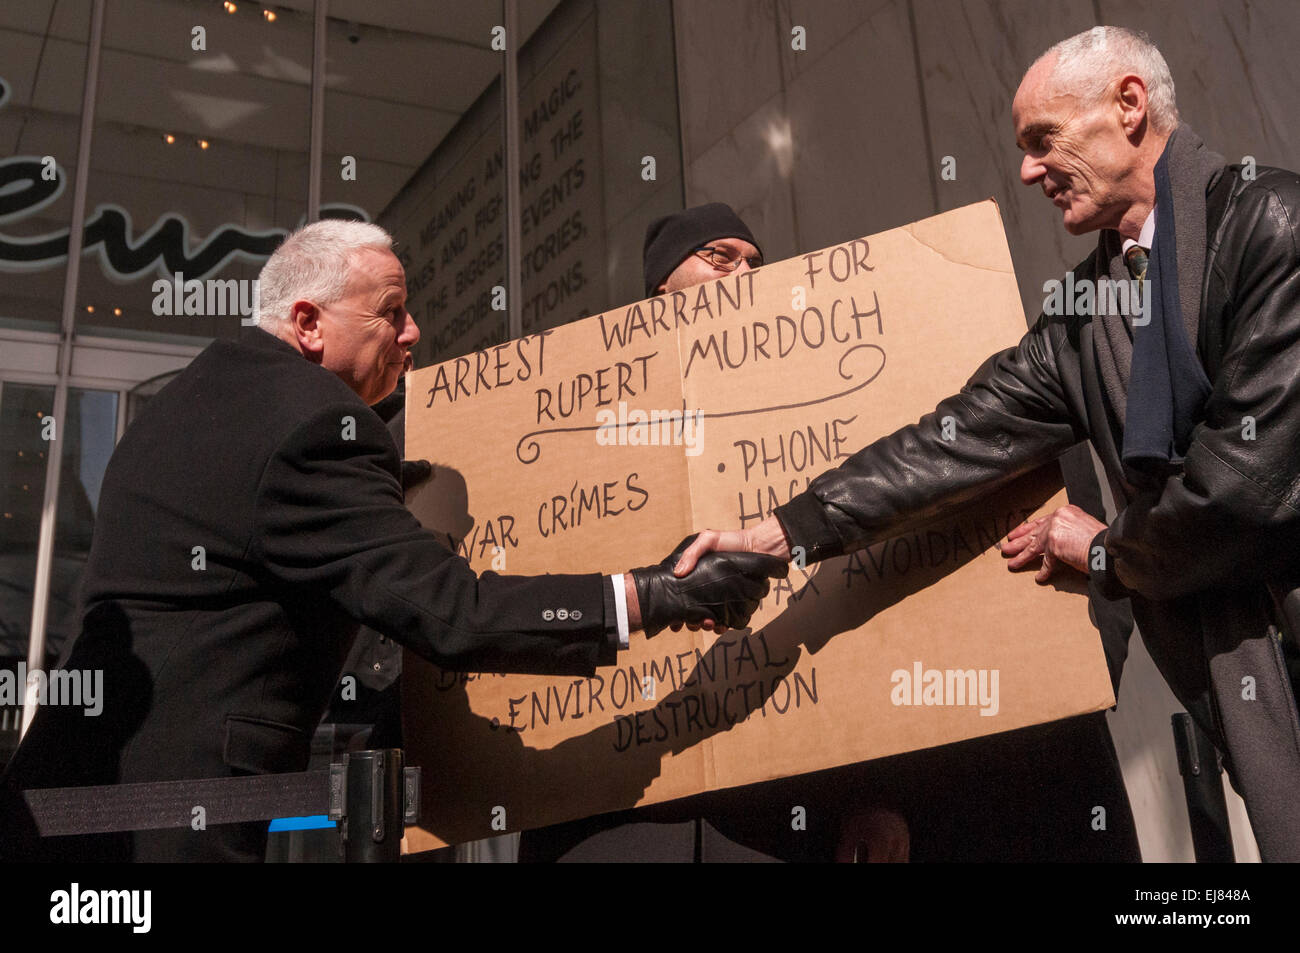 London Bridge Station, London, UK.  23rd March, 2015. Donnachadh McCarthy, Occupy spokesperson, pictured handing over a symbolic arrest warrant for Rupert Murdoch to a member of News UK's staff outside News UK's headquarters, 'the Little Shard' near London Bridge as part of the Occupy Rupert Murdoch protest.  The protest is against the dominance of billionaire owners of UK media: Rupert Murdoch (News UK), Viscount Rothermere (Daily Mail Group), Richard Desmond (The Express) and the Barclay brothers (Telegraph). Credit:  Stephen Chung/Alamy Live News Stock Photo